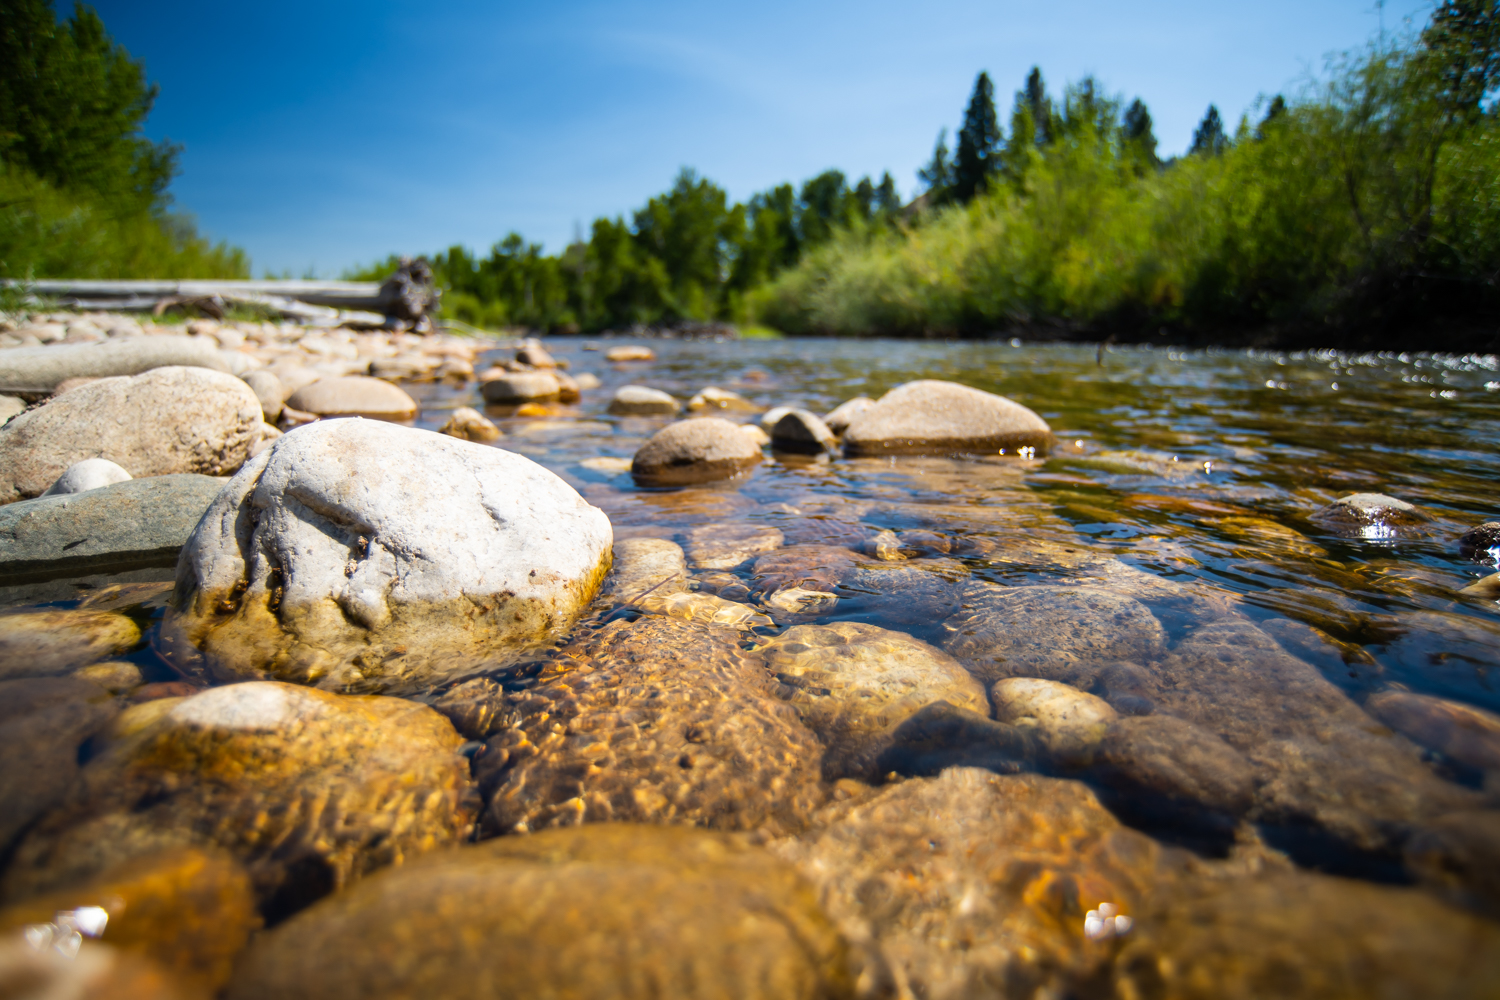 $95 million available for Water Resources and Ecosystem Health